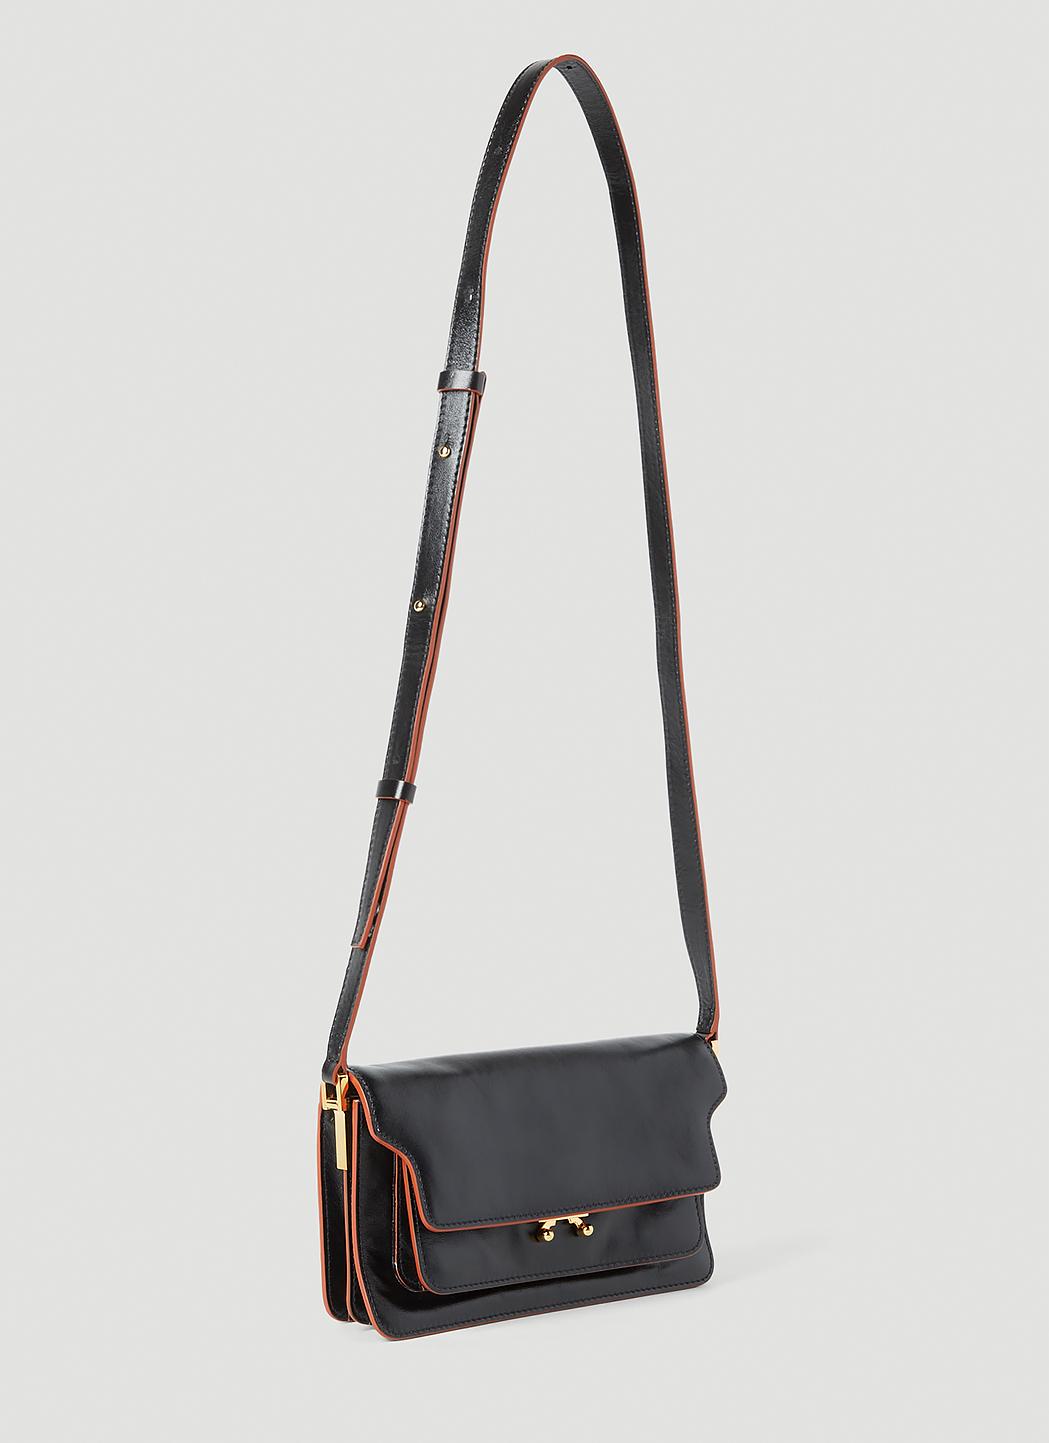 Marni Trunk Bag in Shiny Leather